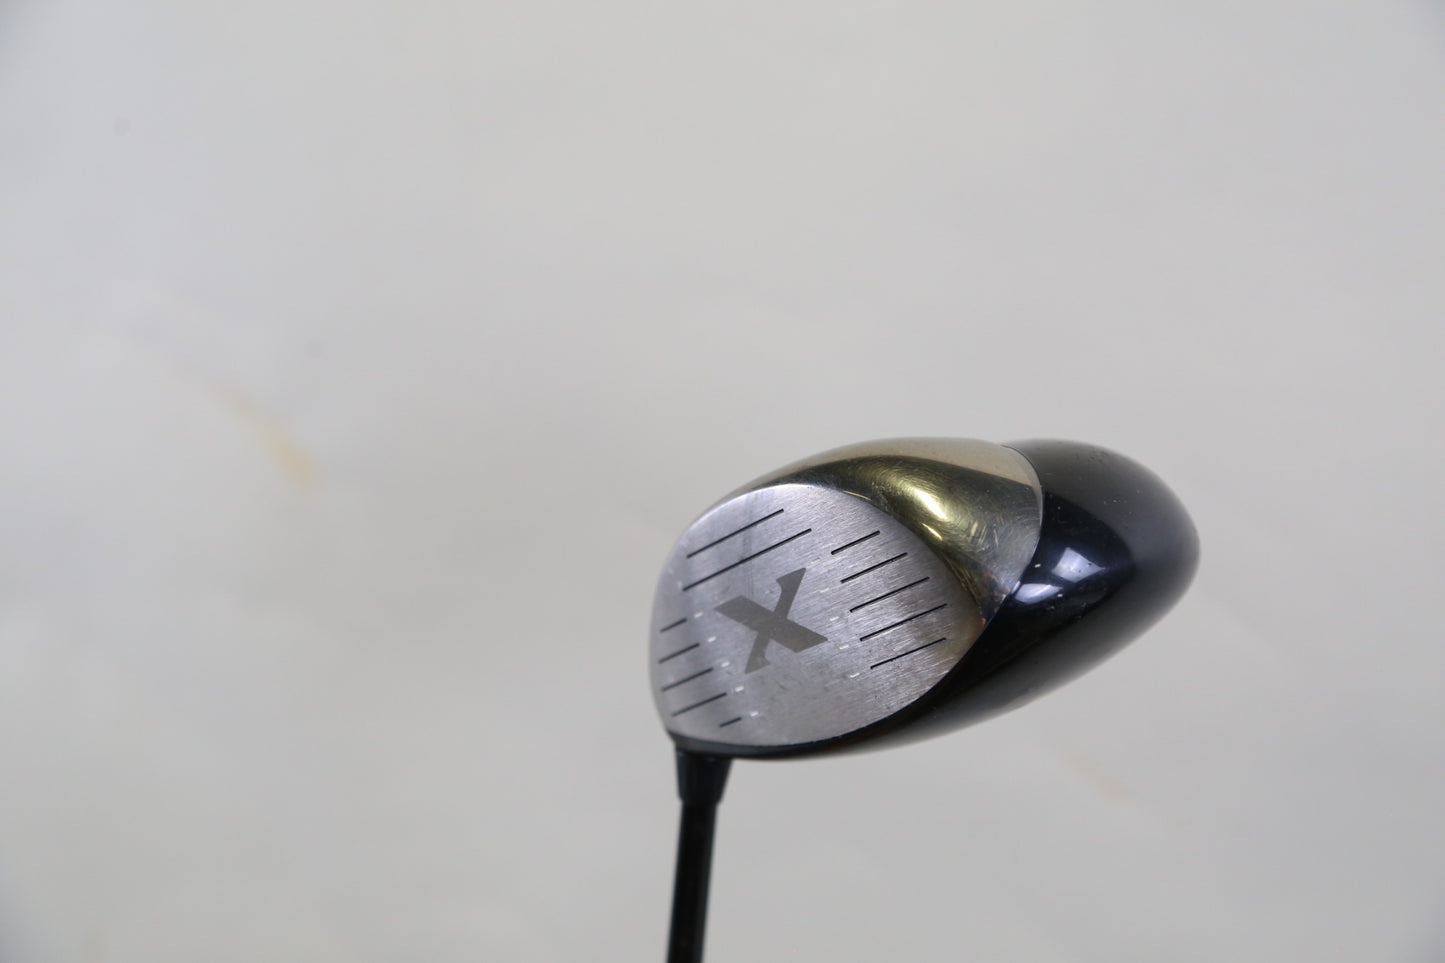 Used Callaway X460 1-Wood - Right-Handed - 11 Degrees - Ladies Flex-Next Round